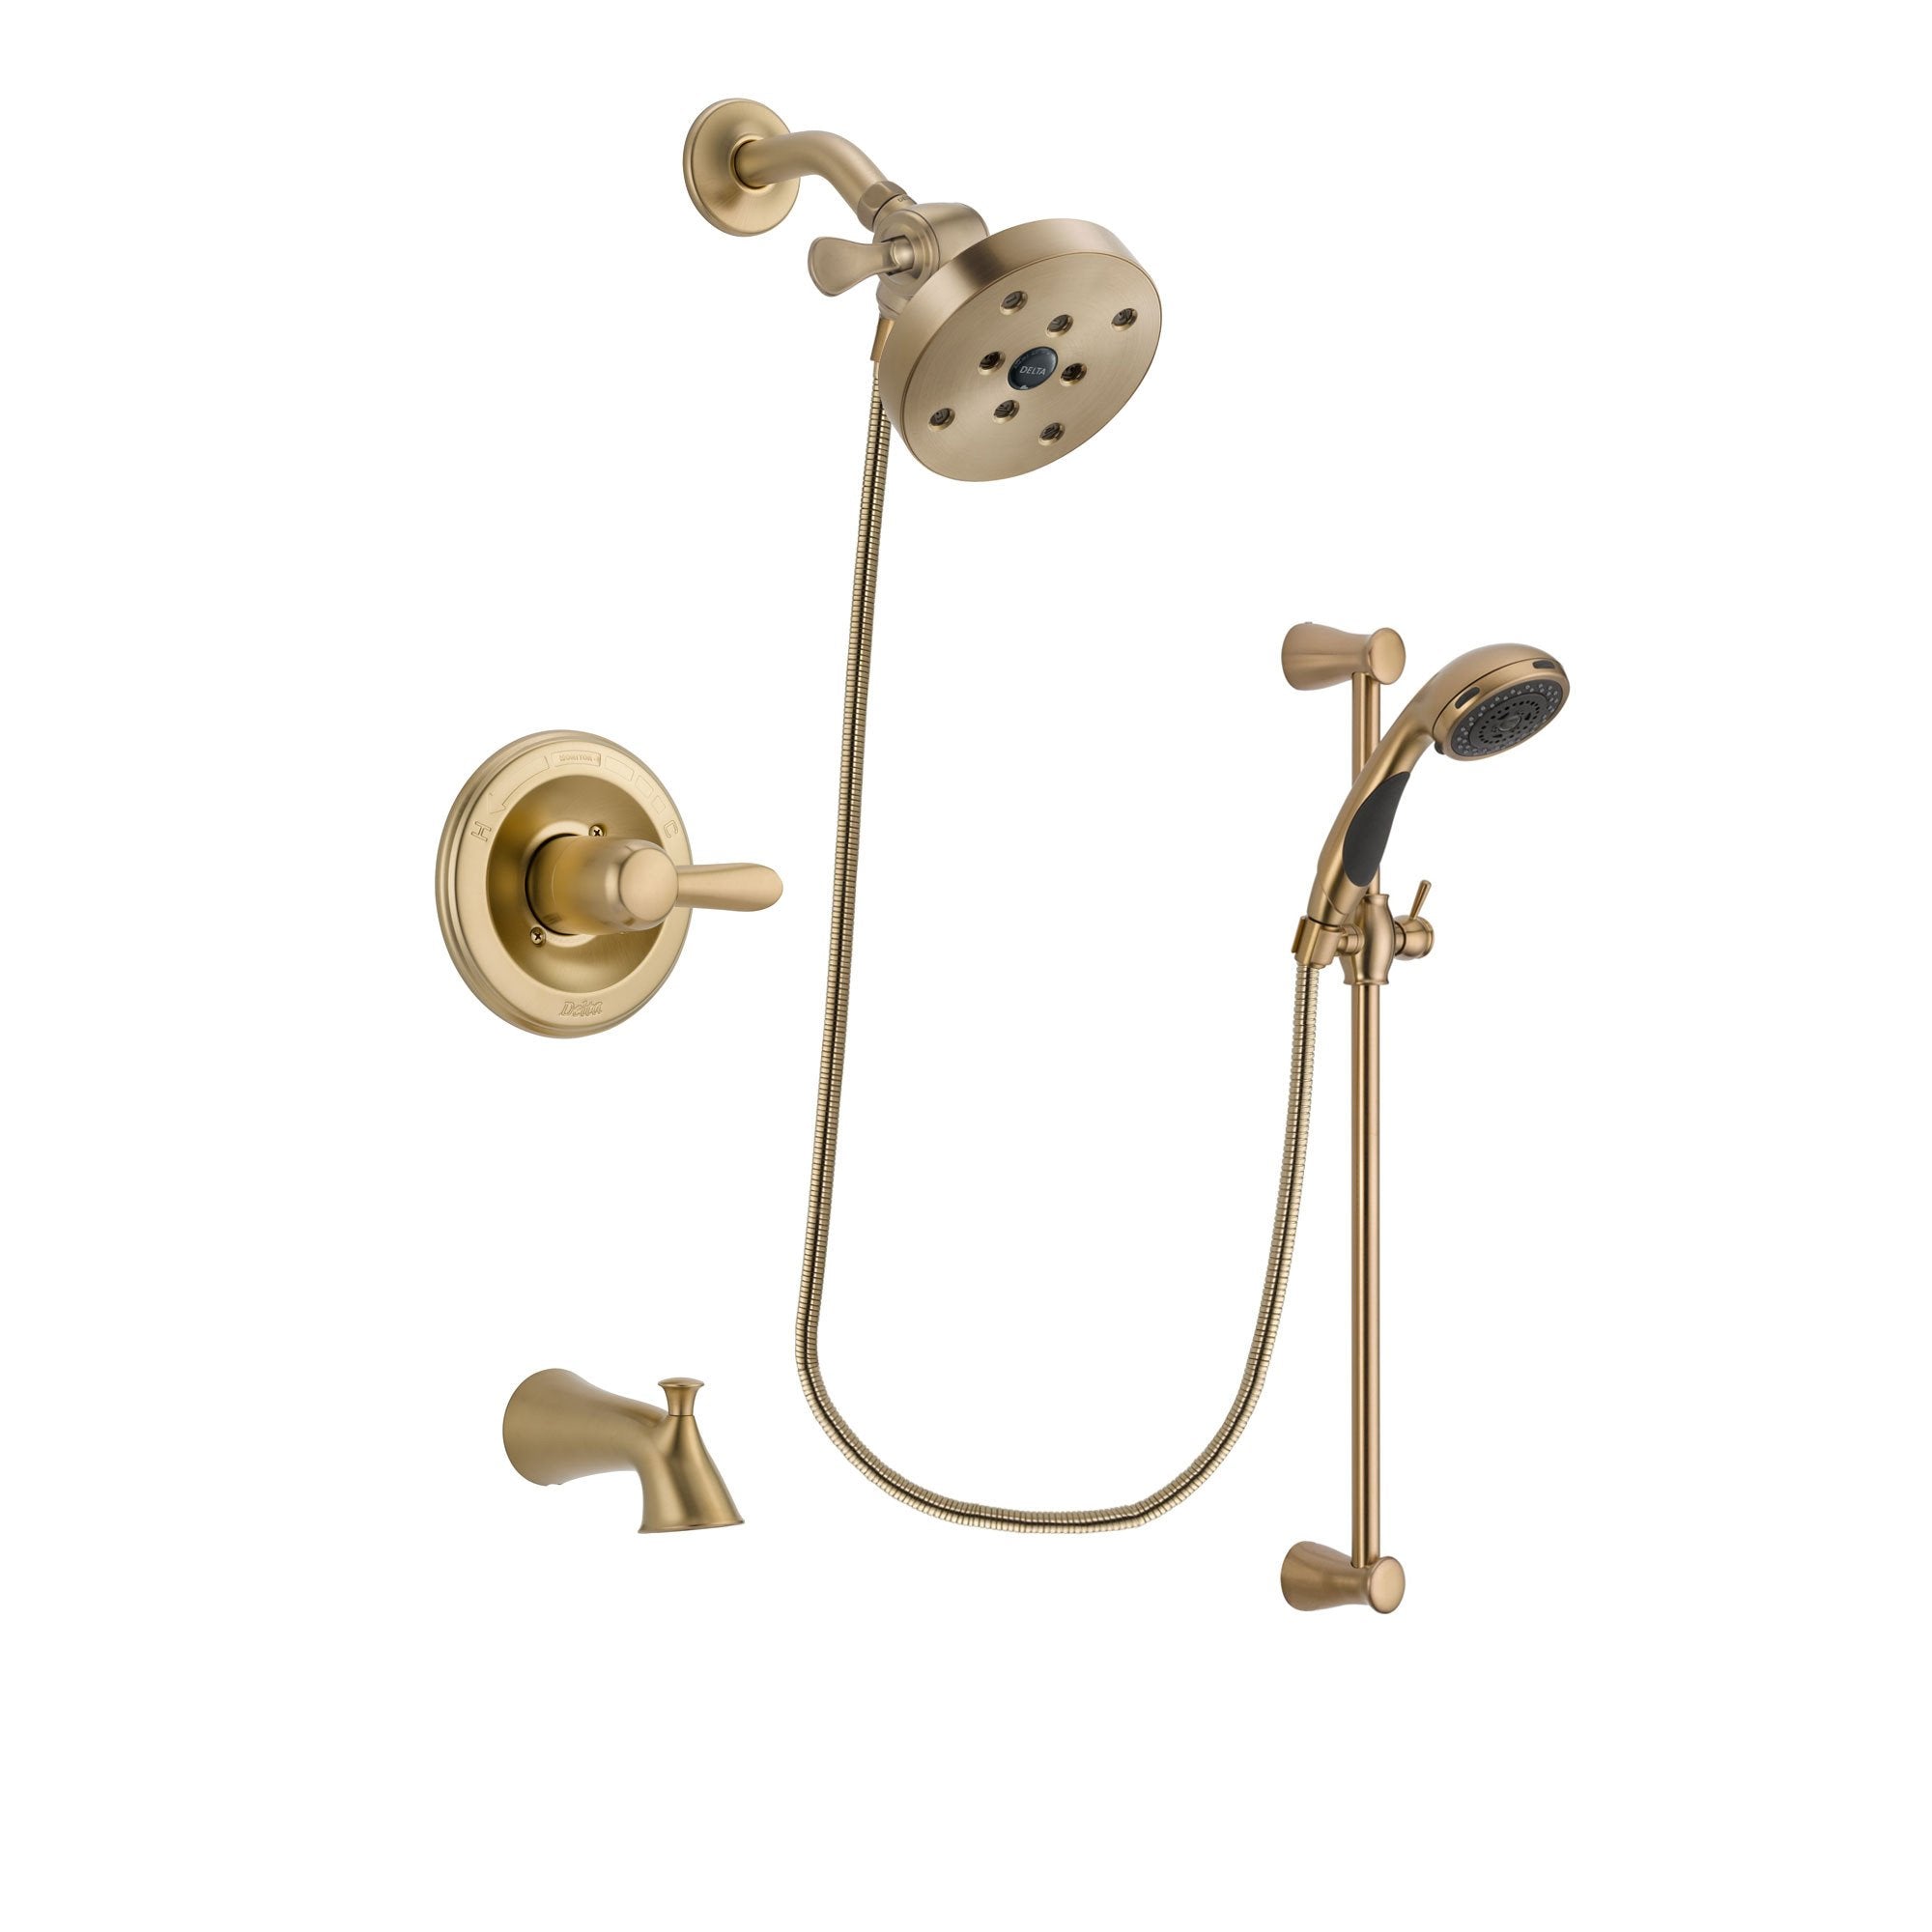 Delta Lahara Champagne Bronze Finish Tub and Shower Faucet System Package with 5-1/2 inch Showerhead and Personal Handheld Shower Sprayer with Slide Bar Includes Rough-in Valve and Tub Spout DSP3507V